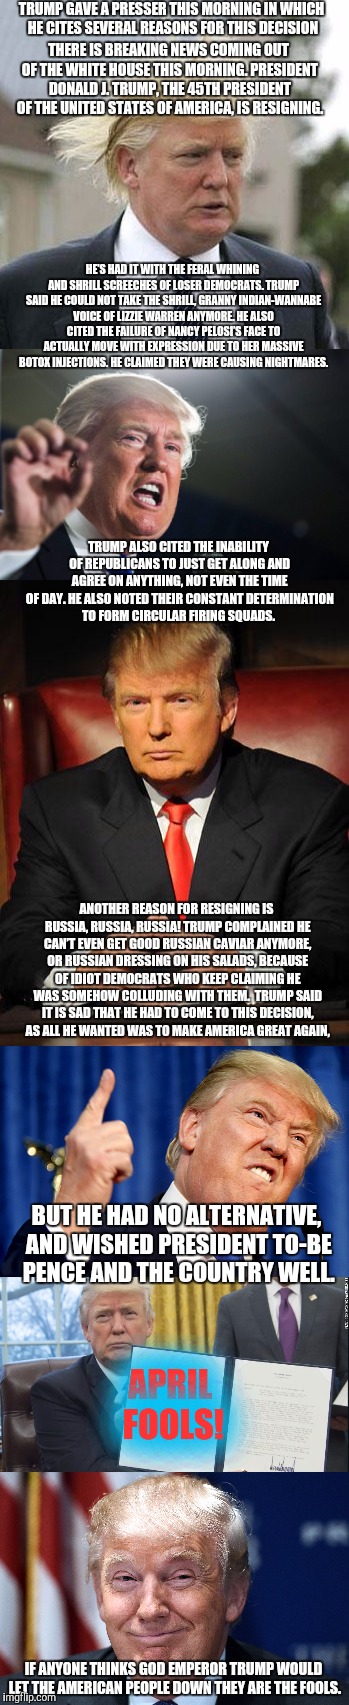 BREAKING!! DISASTER STRIKES!! Donald Trump to resign!! | TRUMP GAVE A PRESSER THIS MORNING IN WHICH HE CITES SEVERAL REASONS FOR THIS DECISION; THERE IS BREAKING NEWS COMING OUT OF THE WHITE HOUSE THIS MORNING. PRESIDENT DONALD J. TRUMP, THE 45TH PRESIDENT OF THE UNITED STATES OF AMERICA, IS RESIGNING. HE’S HAD IT WITH THE FERAL WHINING AND SHRILL SCREECHES OF LOSER DEMOCRATS. TRUMP SAID HE COULD NOT TAKE THE SHRILL, GRANNY INDIAN-WANNABE VOICE OF LIZZIE WARREN ANYMORE. HE ALSO CITED THE FAILURE OF NANCY PELOSI’S FACE TO ACTUALLY MOVE WITH EXPRESSION DUE TO HER MASSIVE BOTOX INJECTIONS. HE CLAIMED THEY WERE CAUSING NIGHTMARES. TRUMP ALSO CITED THE INABILITY OF REPUBLICANS TO JUST GET ALONG AND AGREE ON ANYTHING, NOT EVEN THE TIME OF DAY. HE ALSO NOTED THEIR CONSTANT DETERMINATION TO FORM CIRCULAR FIRING SQUADS. ANOTHER REASON FOR RESIGNING IS RUSSIA, RUSSIA, RUSSIA! TRUMP COMPLAINED HE CAN’T EVEN GET GOOD RUSSIAN CAVIAR ANYMORE, OR RUSSIAN DRESSING ON HIS SALADS, BECAUSE OF IDIOT DEMOCRATS WHO KEEP CLAIMING HE WAS SOMEHOW COLLUDING WITH THEM.

TRUMP SAID IT IS SAD THAT HE HAD TO COME TO THIS DECISION, AS ALL HE WANTED WAS TO MAKE AMERICA GREAT AGAIN, BUT HE HAD NO ALTERNATIVE, AND WISHED PRESIDENT TO-BE PENCE AND THE COUNTRY WELL. APRIL FOOLS! IF ANYONE THINKS GOD EMPEROR TRUMP WOULD LET THE AMERICAN PEOPLE DOWN THEY ARE THE FOOLS. | image tagged in donald trump,memes,united states,april fools | made w/ Imgflip meme maker